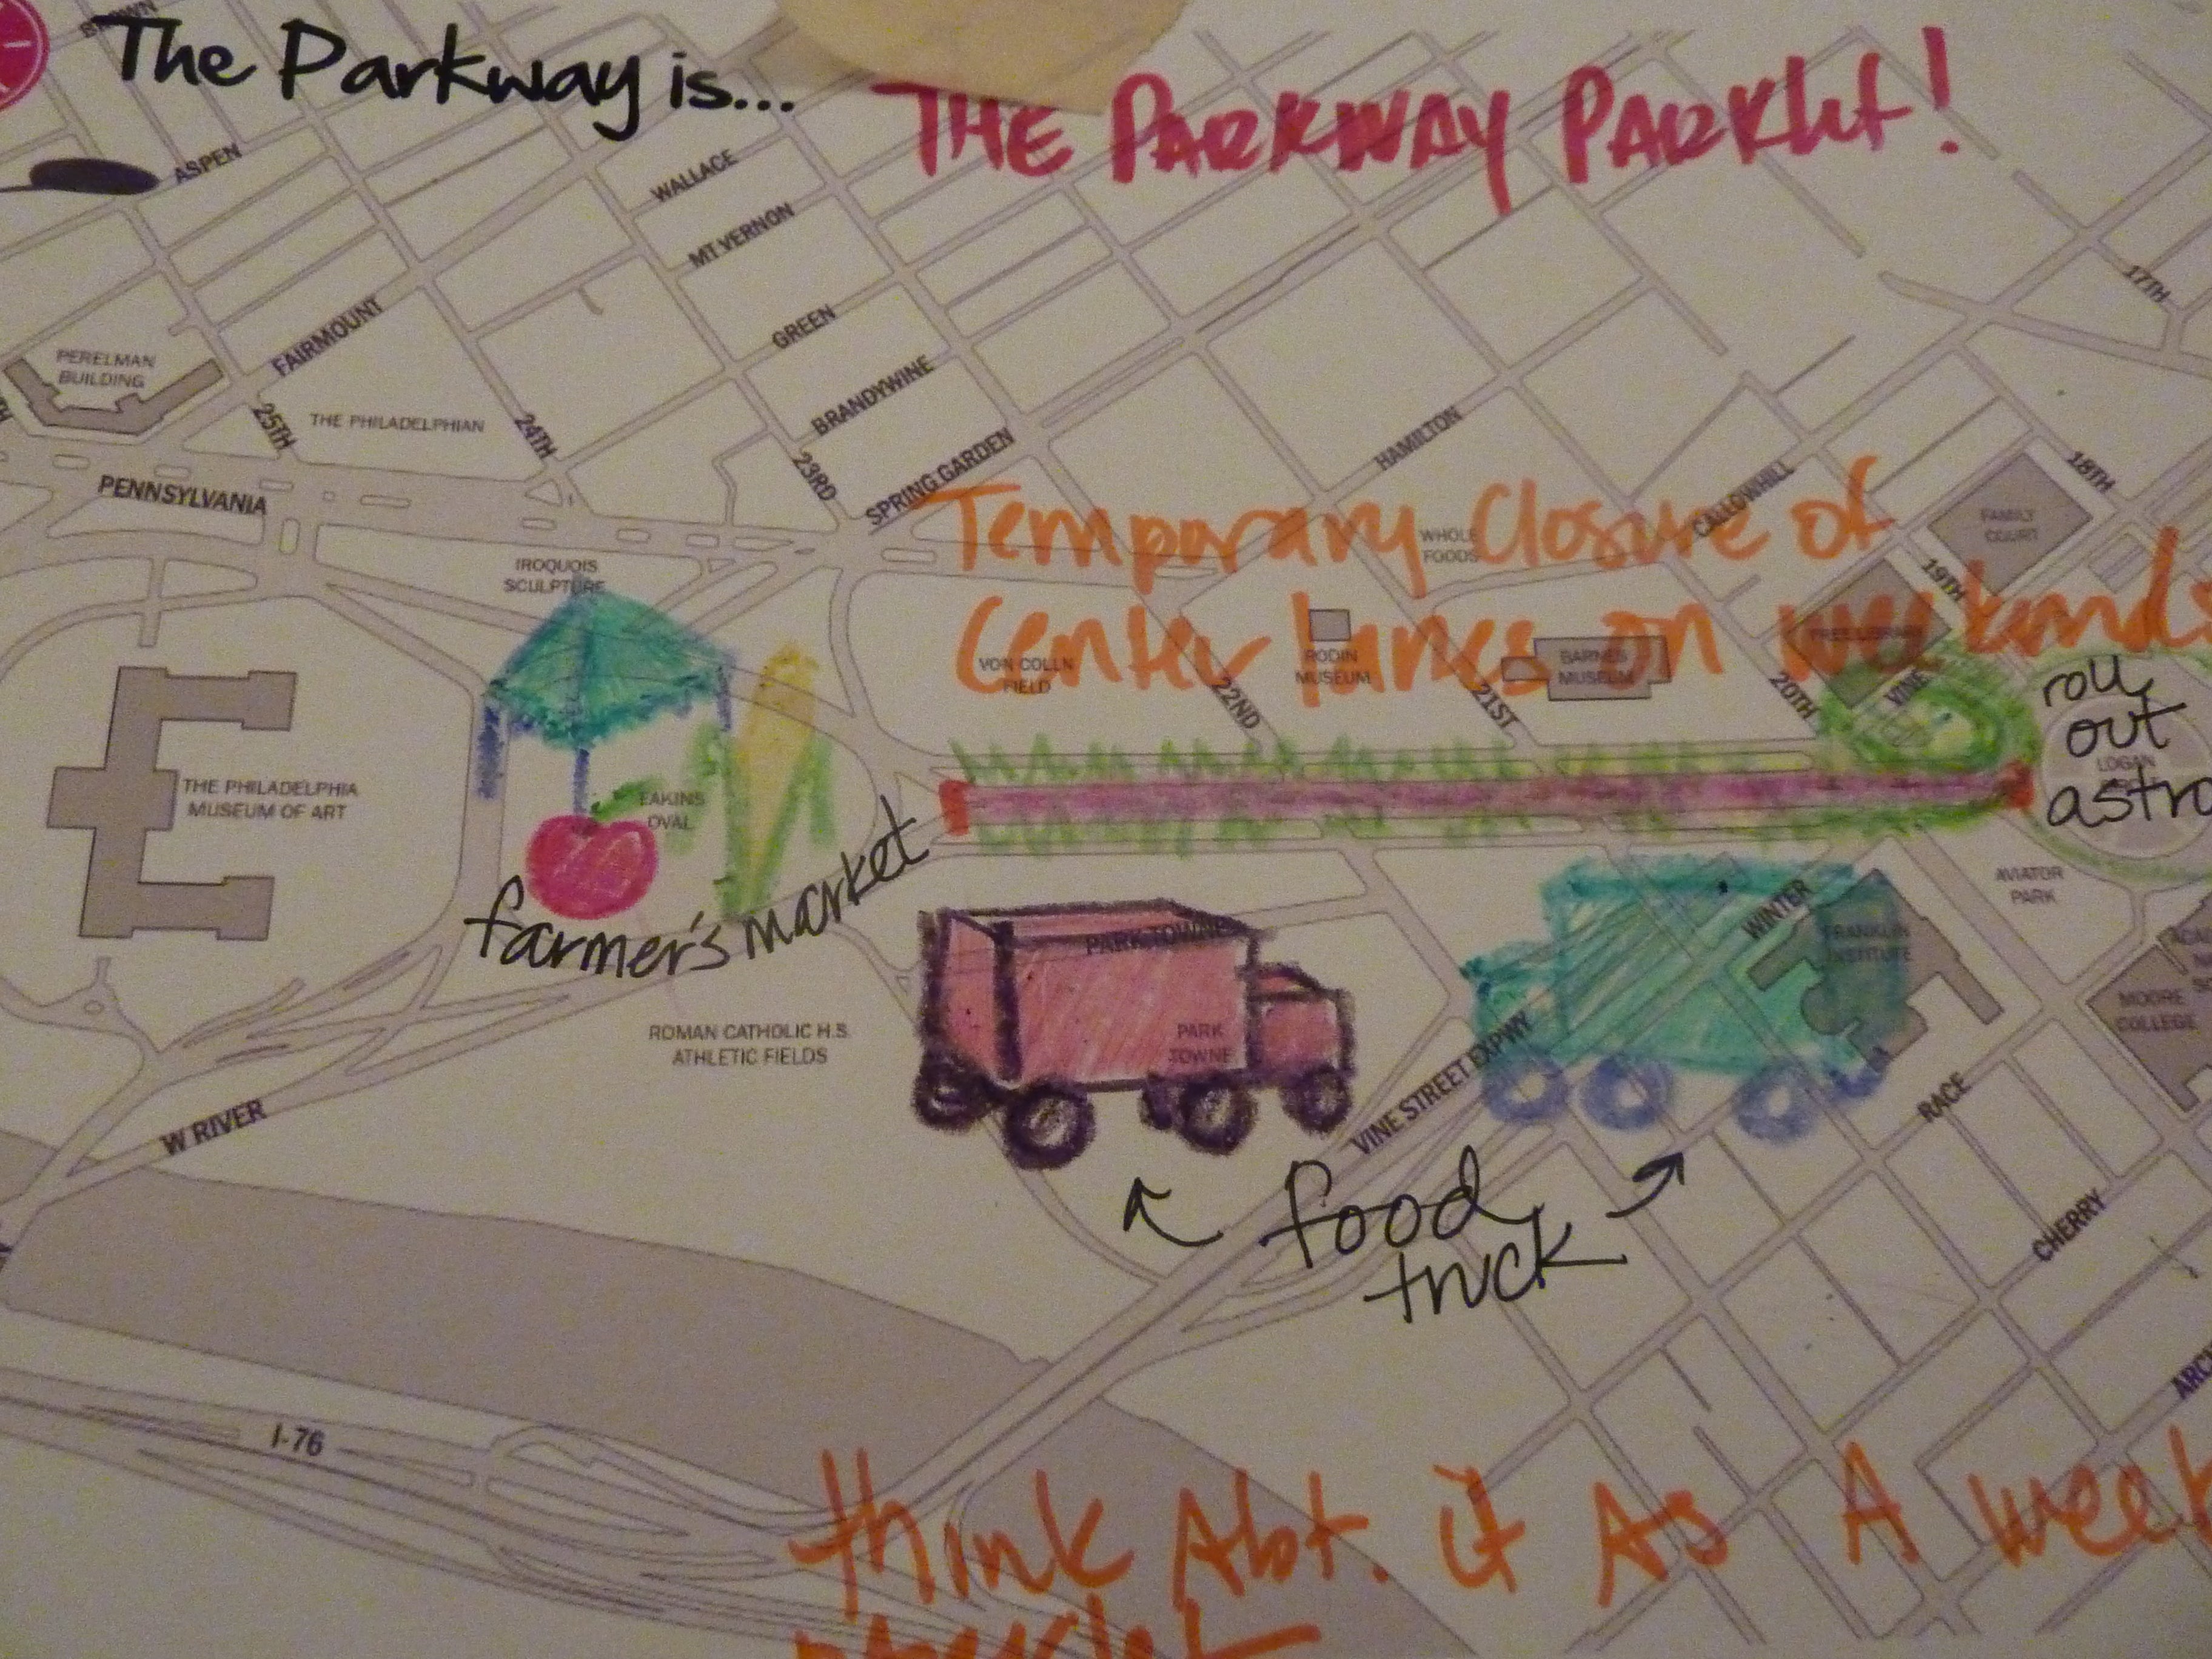 More citizen-driven ideas for the Parkway